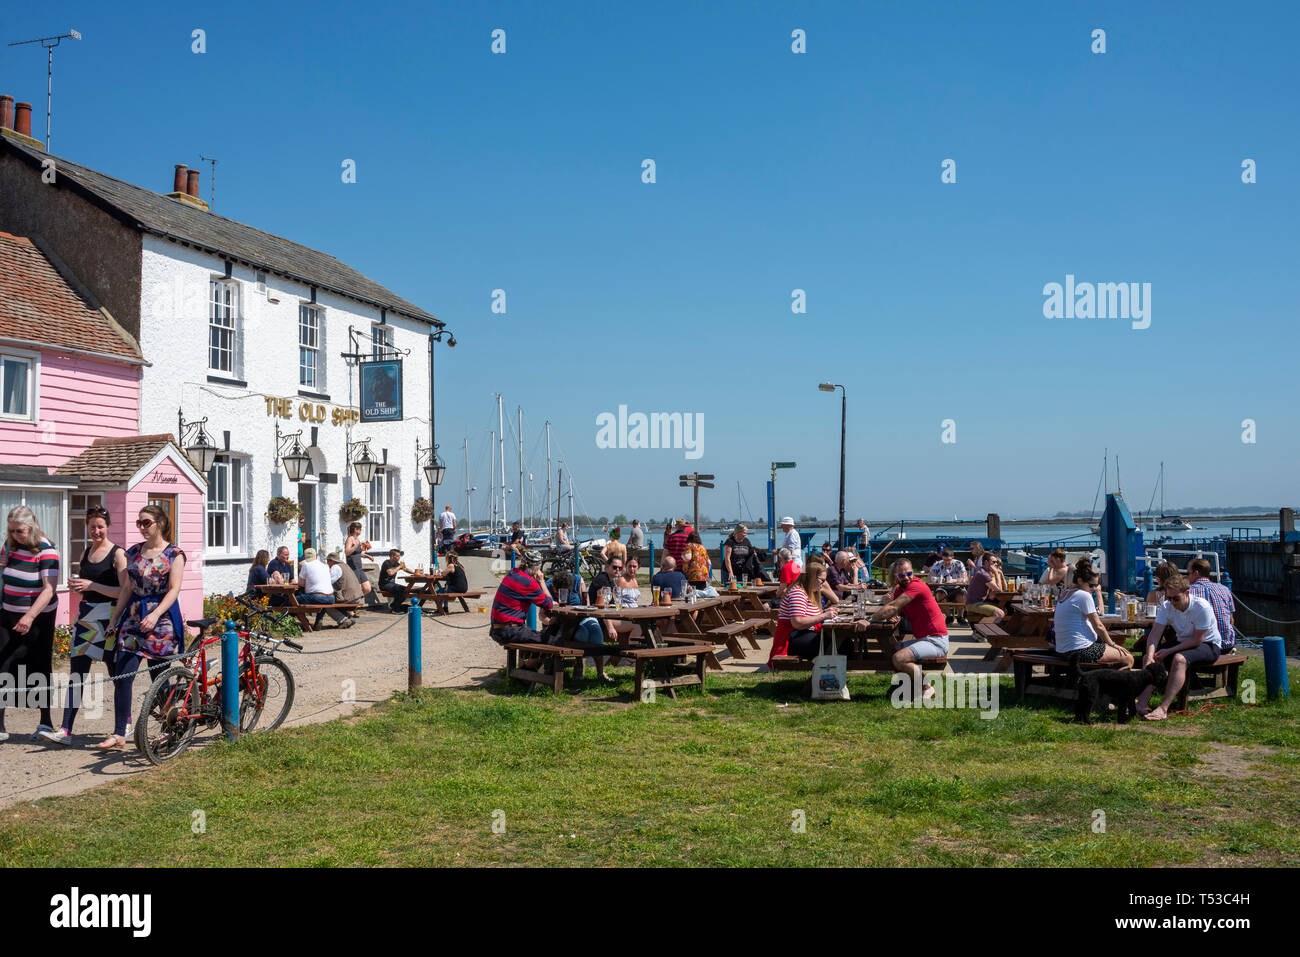 Heybridge Basin, Essex, UK. Warm and sunny weather brought people out to visit The Old Ship pub close to the lock to the Chelmer and Blackwater canal Stock Photo